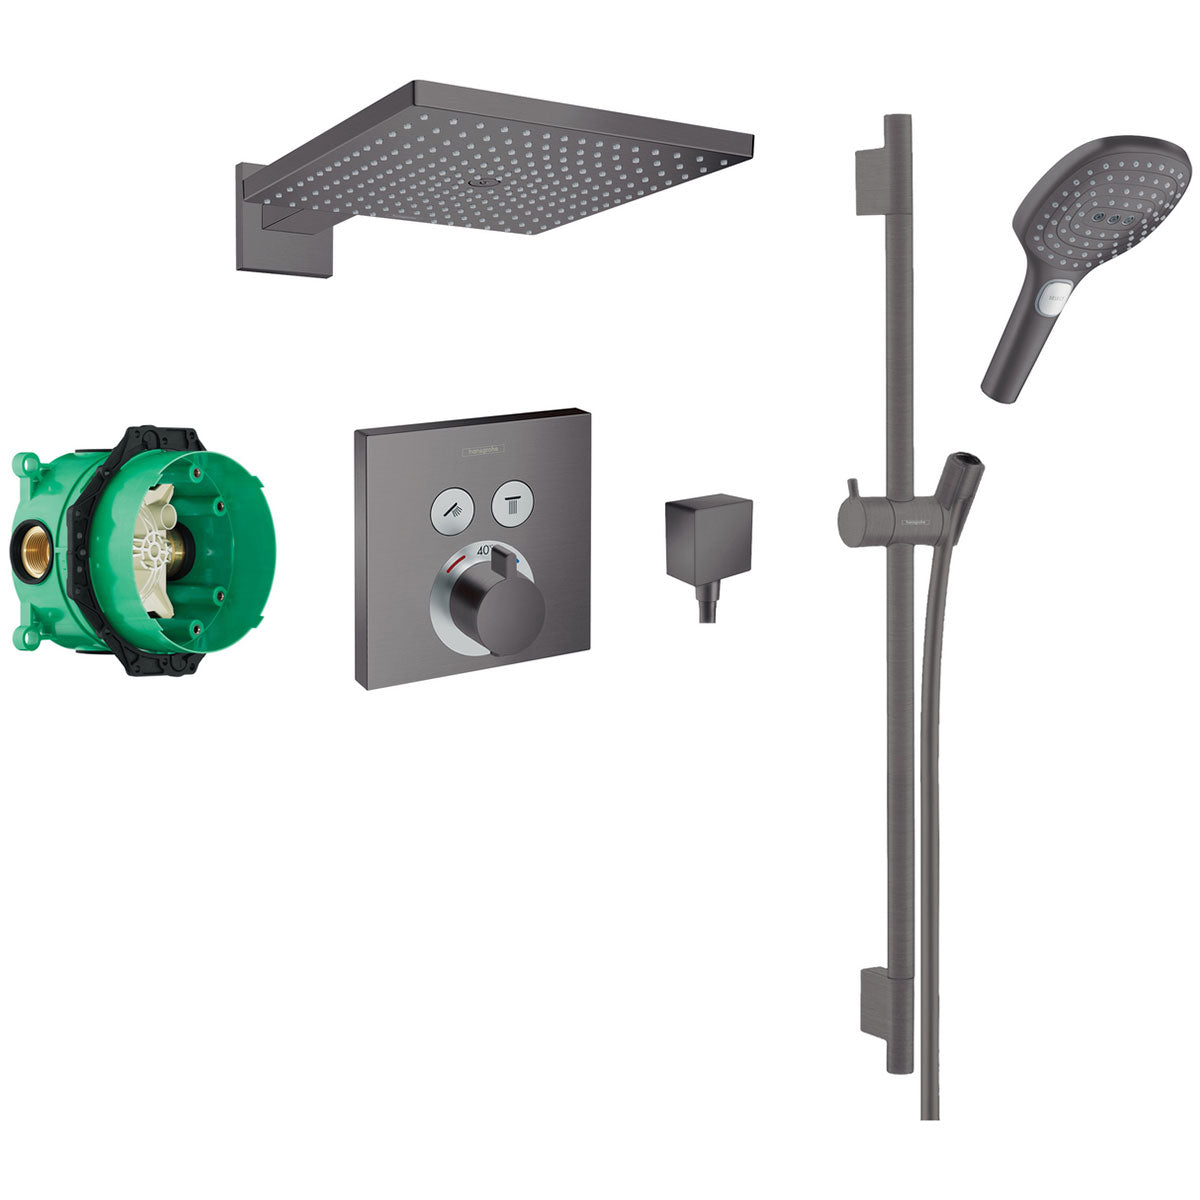 Hansgrohe Square 2 Outlet Push Thermostatic Valve with Raindance Overhead Shower and Slide Rail Kit - Brushed Black Chrome